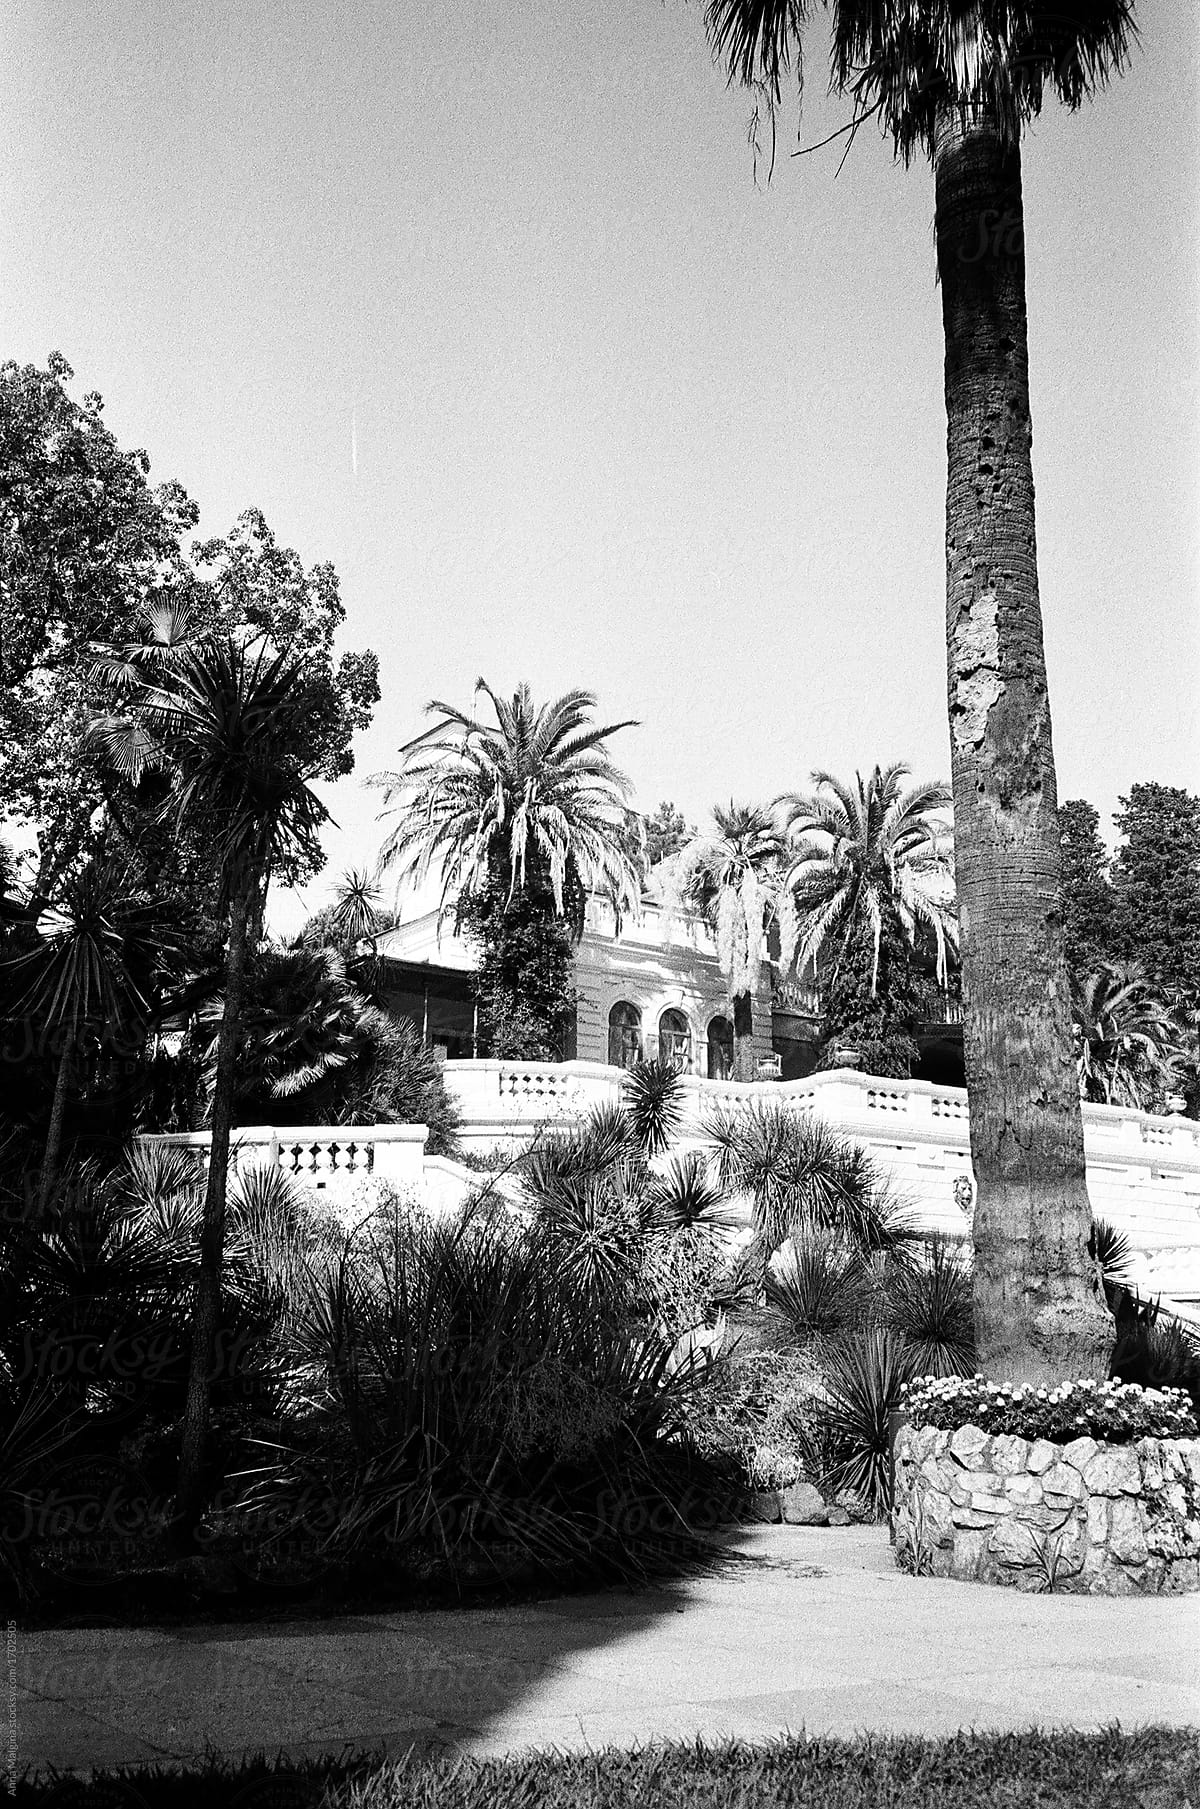 Palms in a park